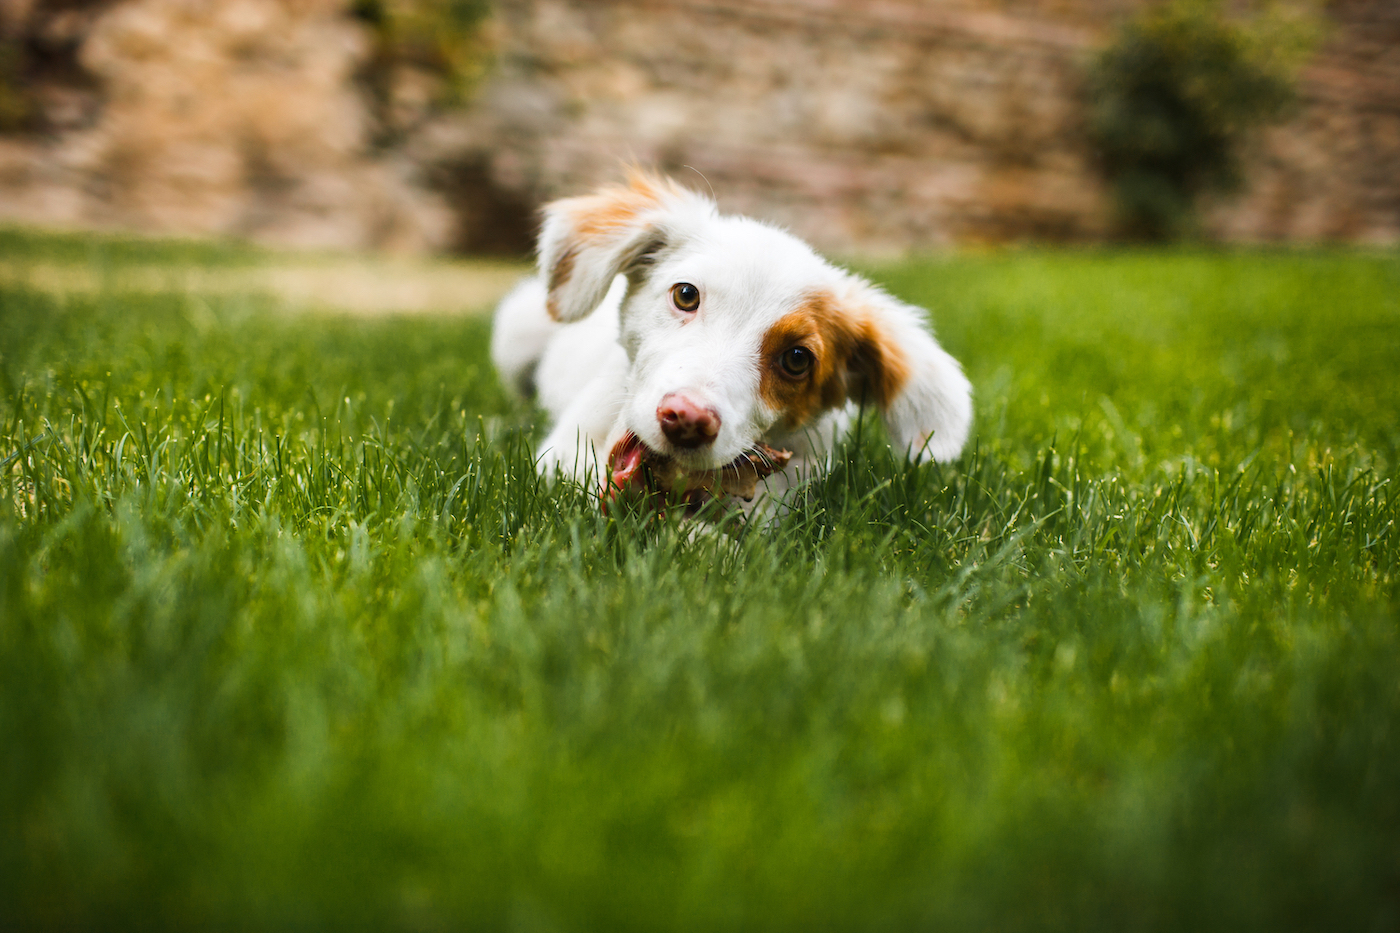 Dogs Eating Grass: Why do they do it?